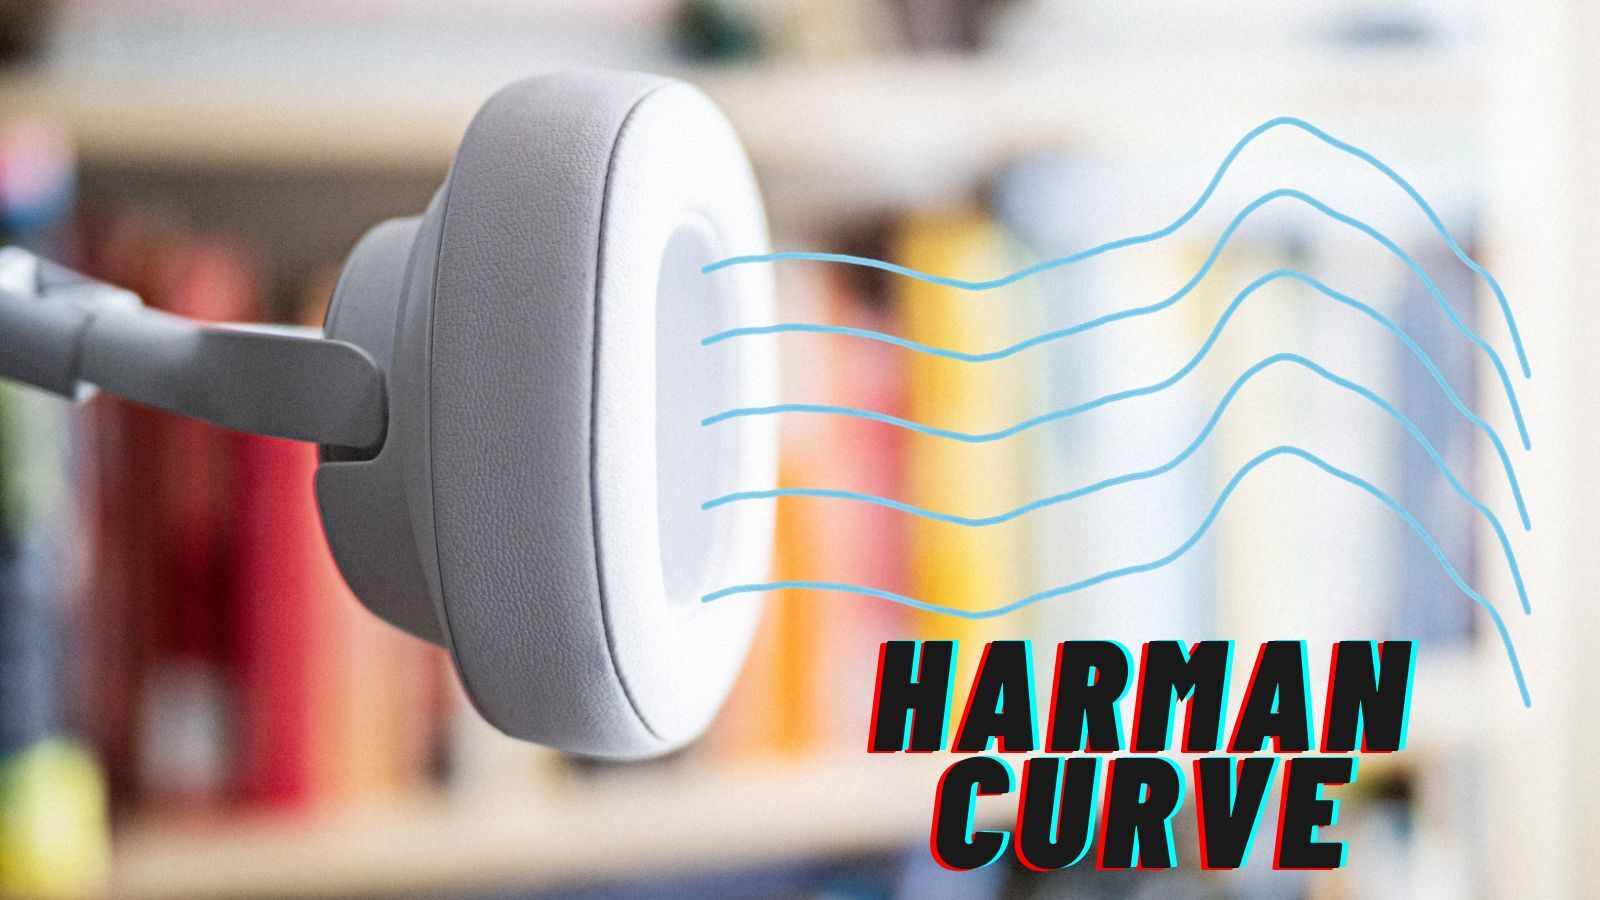 Harman Curve:  Why Say It Give the Premium Sound Quality?